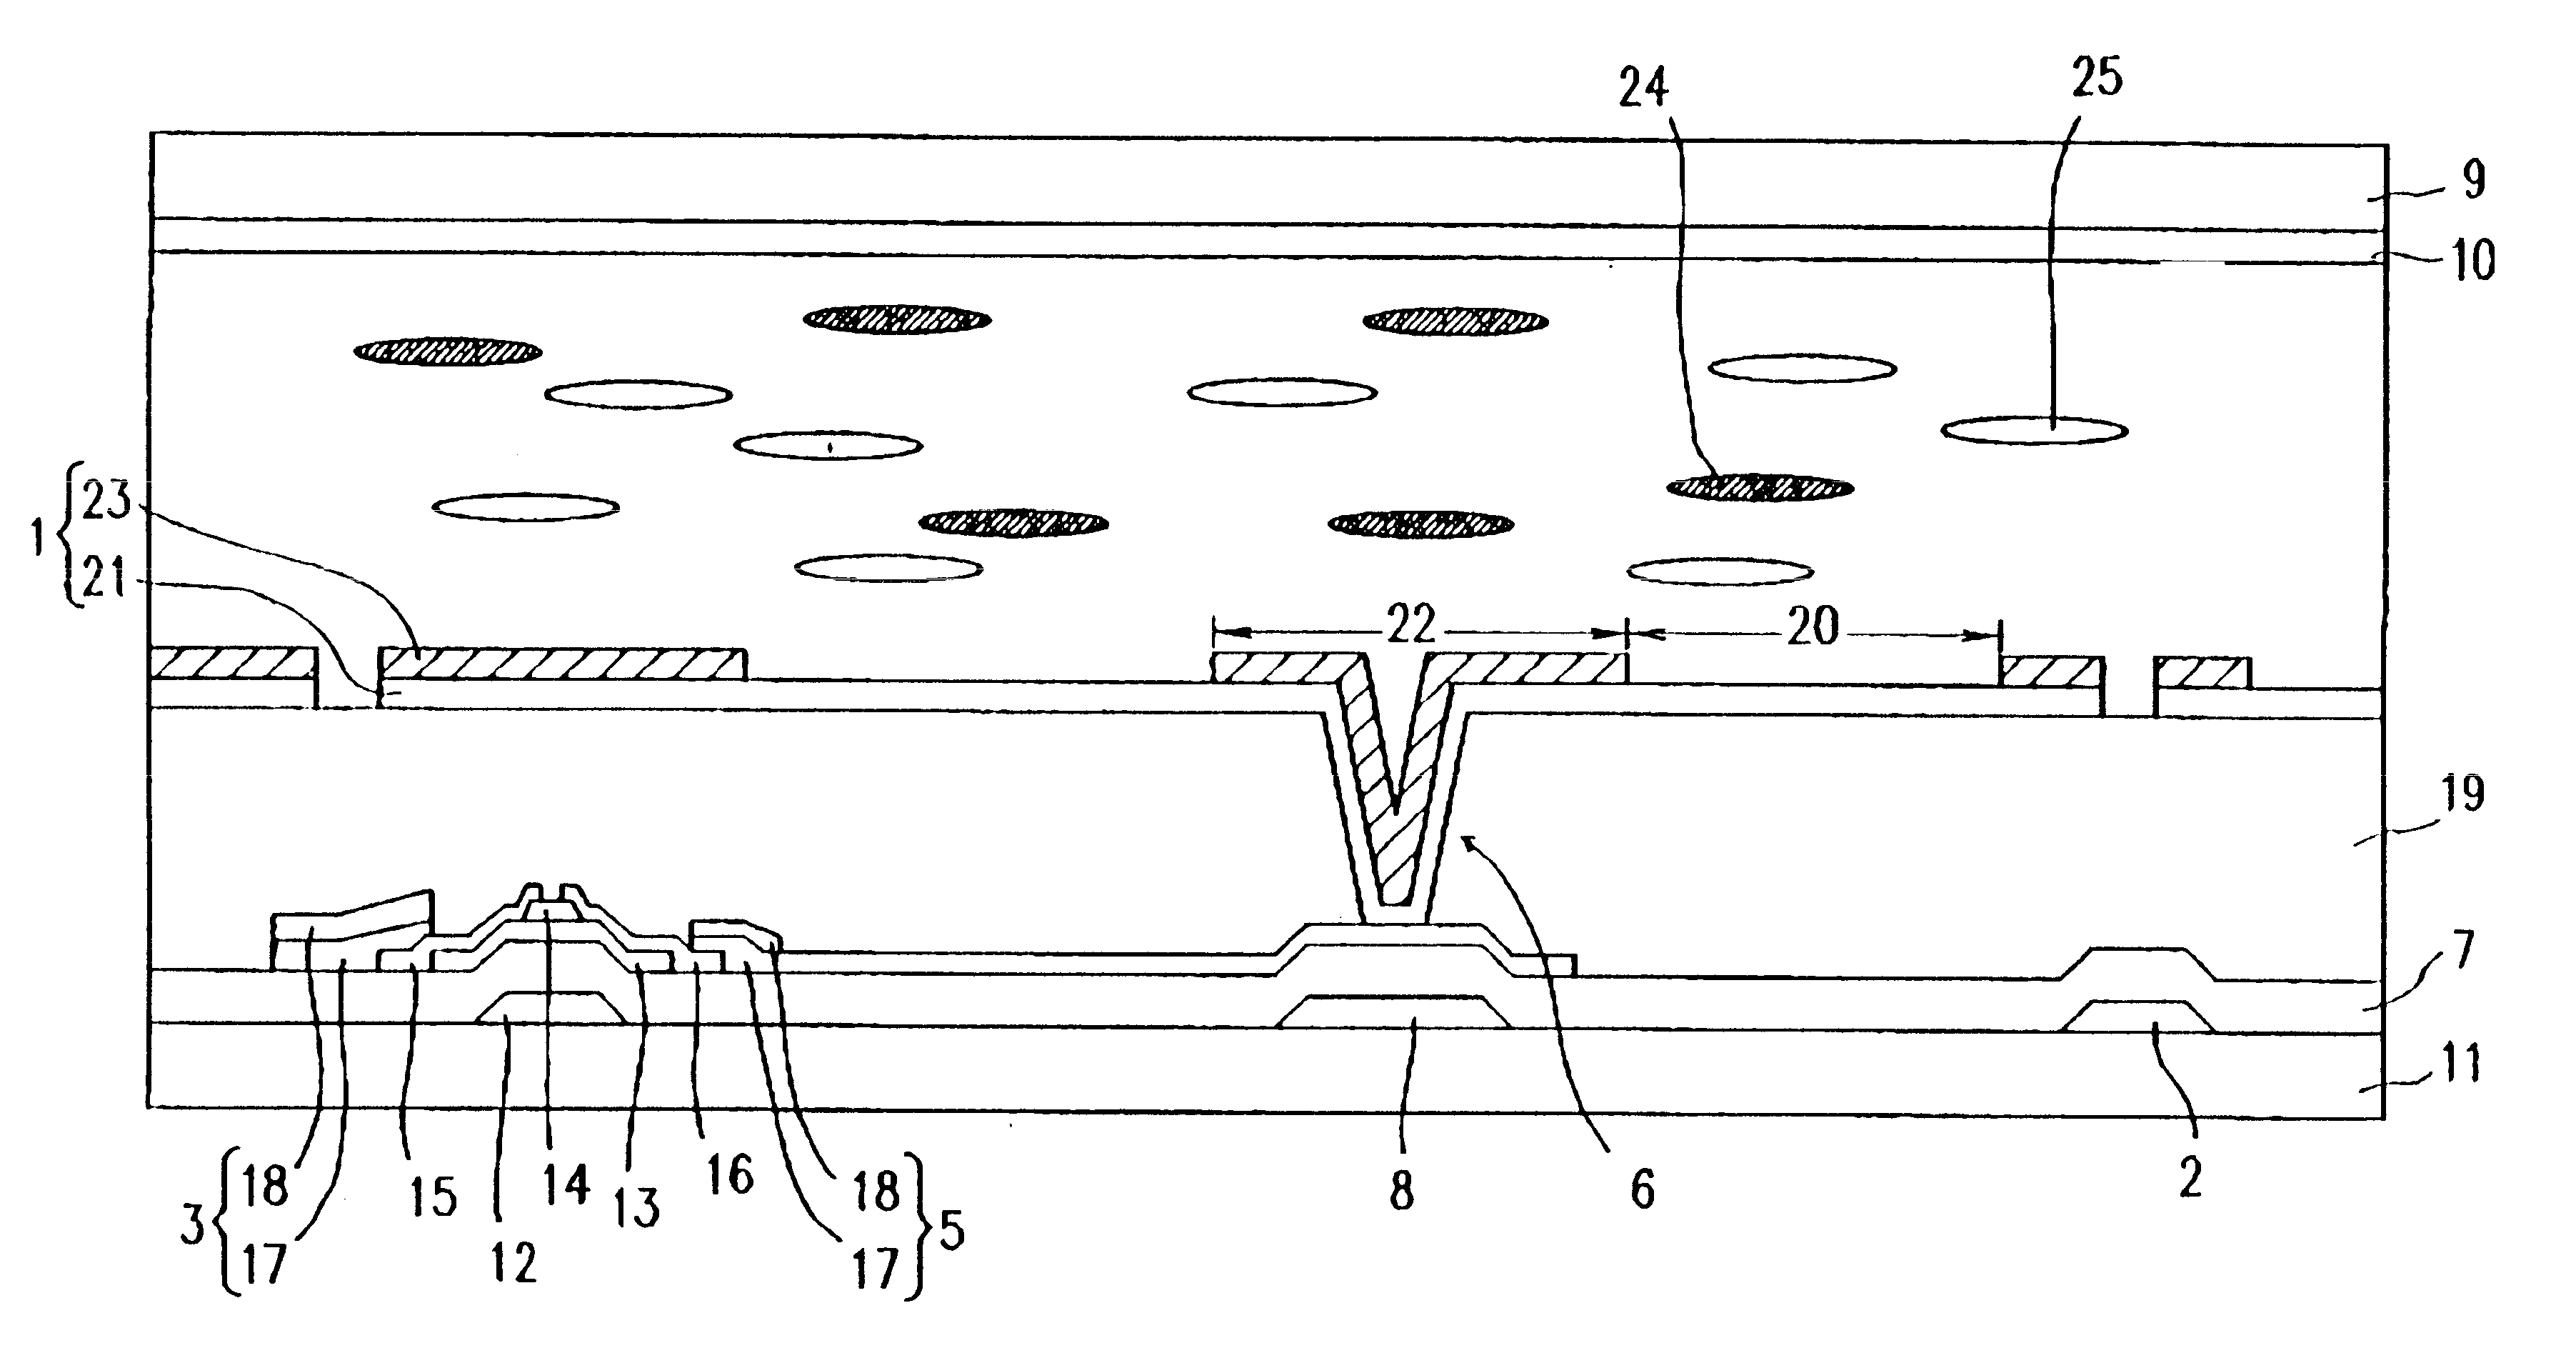 Liquid crystal display in which at least one pixel includes both a transmissive region and a reflective region